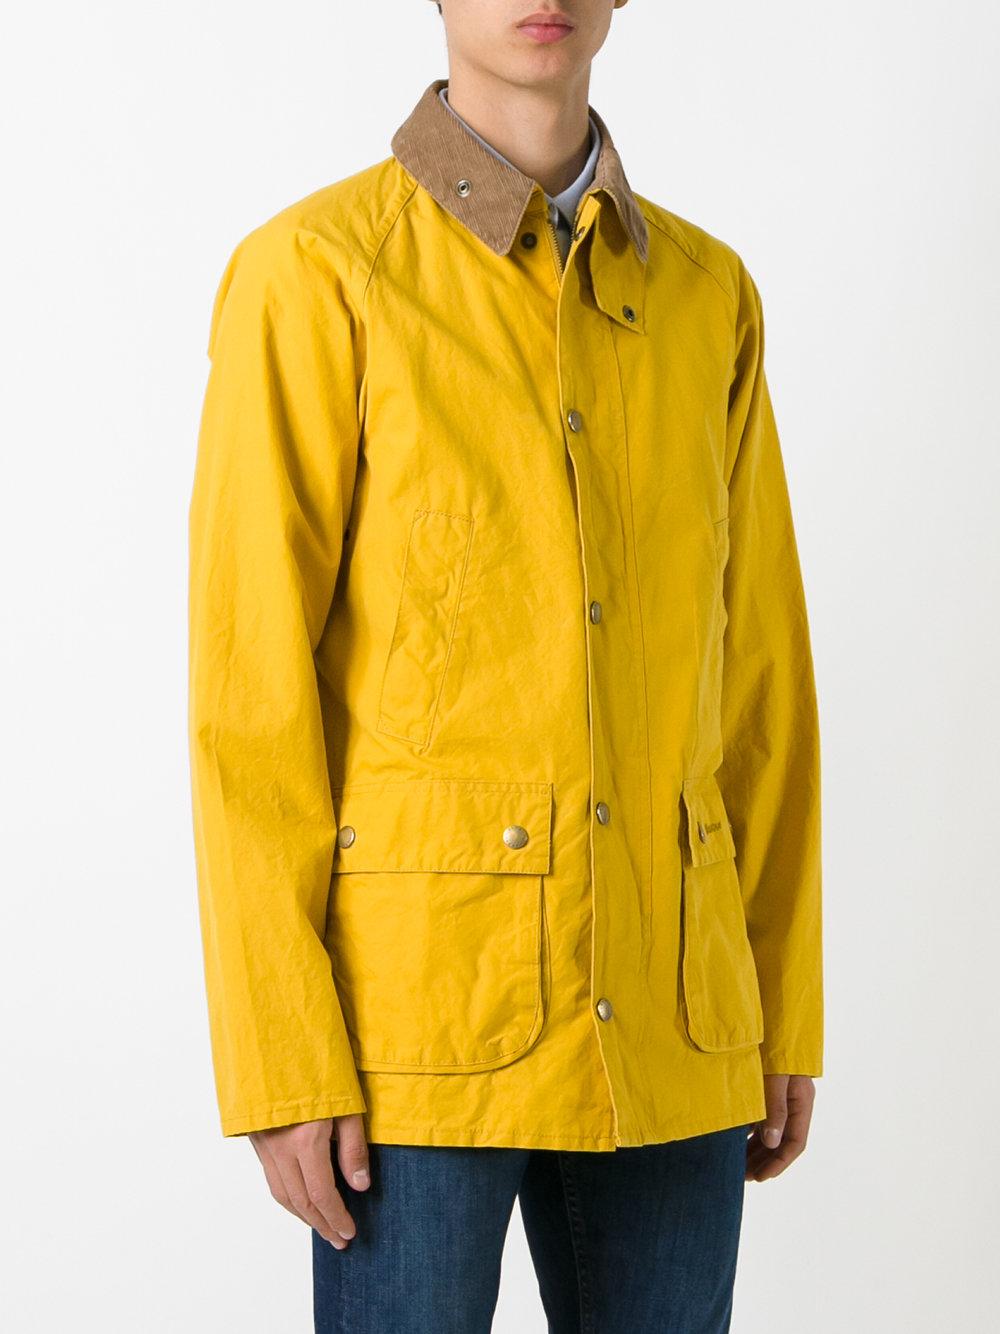 Barbour Cotton Washed Bedale Lightweight Jacket in Yellow/Orange (Yellow)  for Men - Lyst